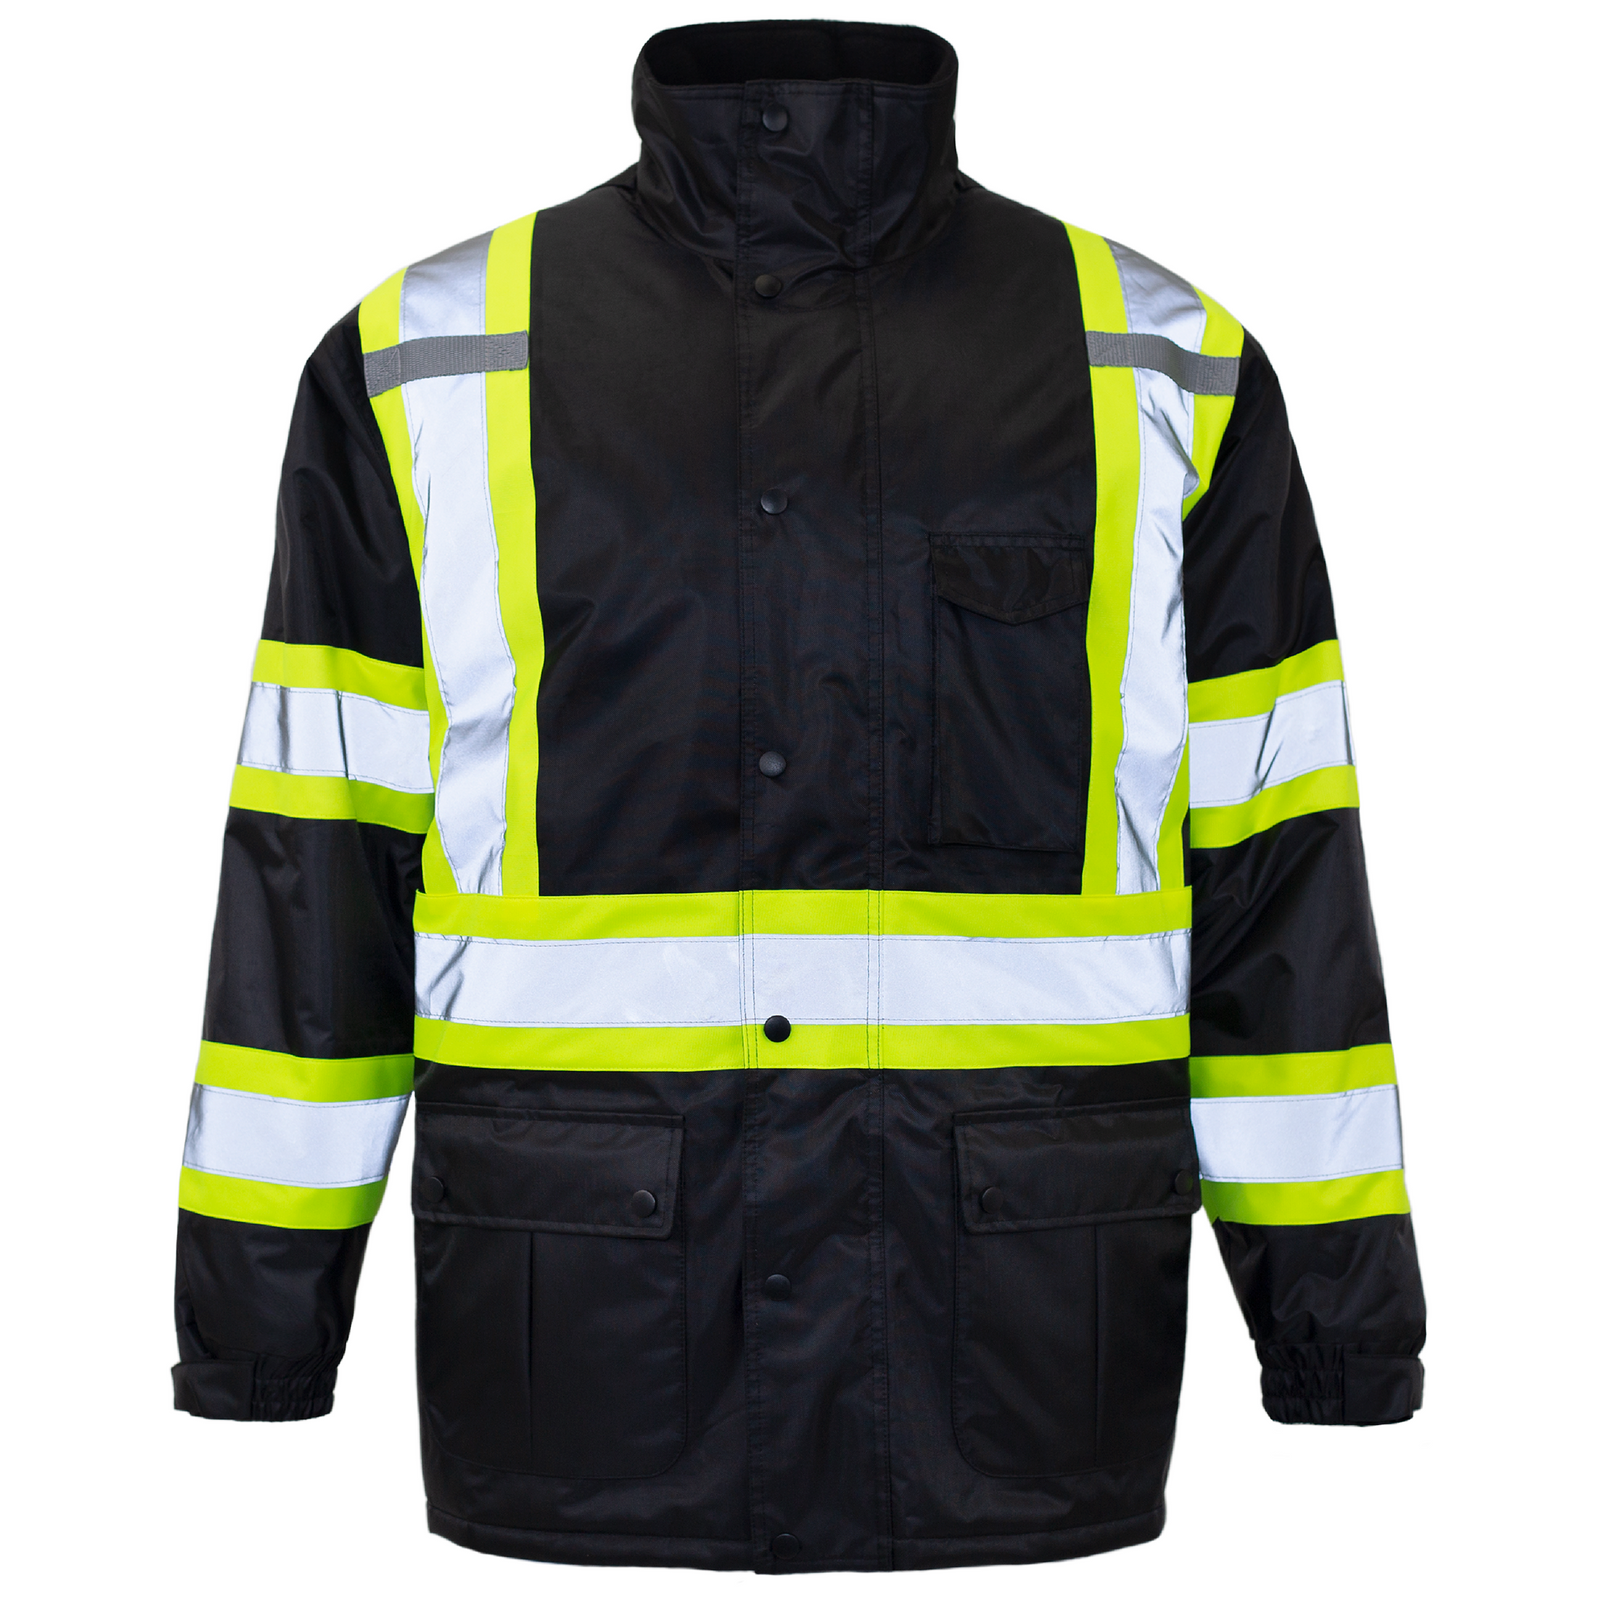 Hi-vis black and lime safety jacket with reflective stripes, radio tabs, multiple pockets and X on the back